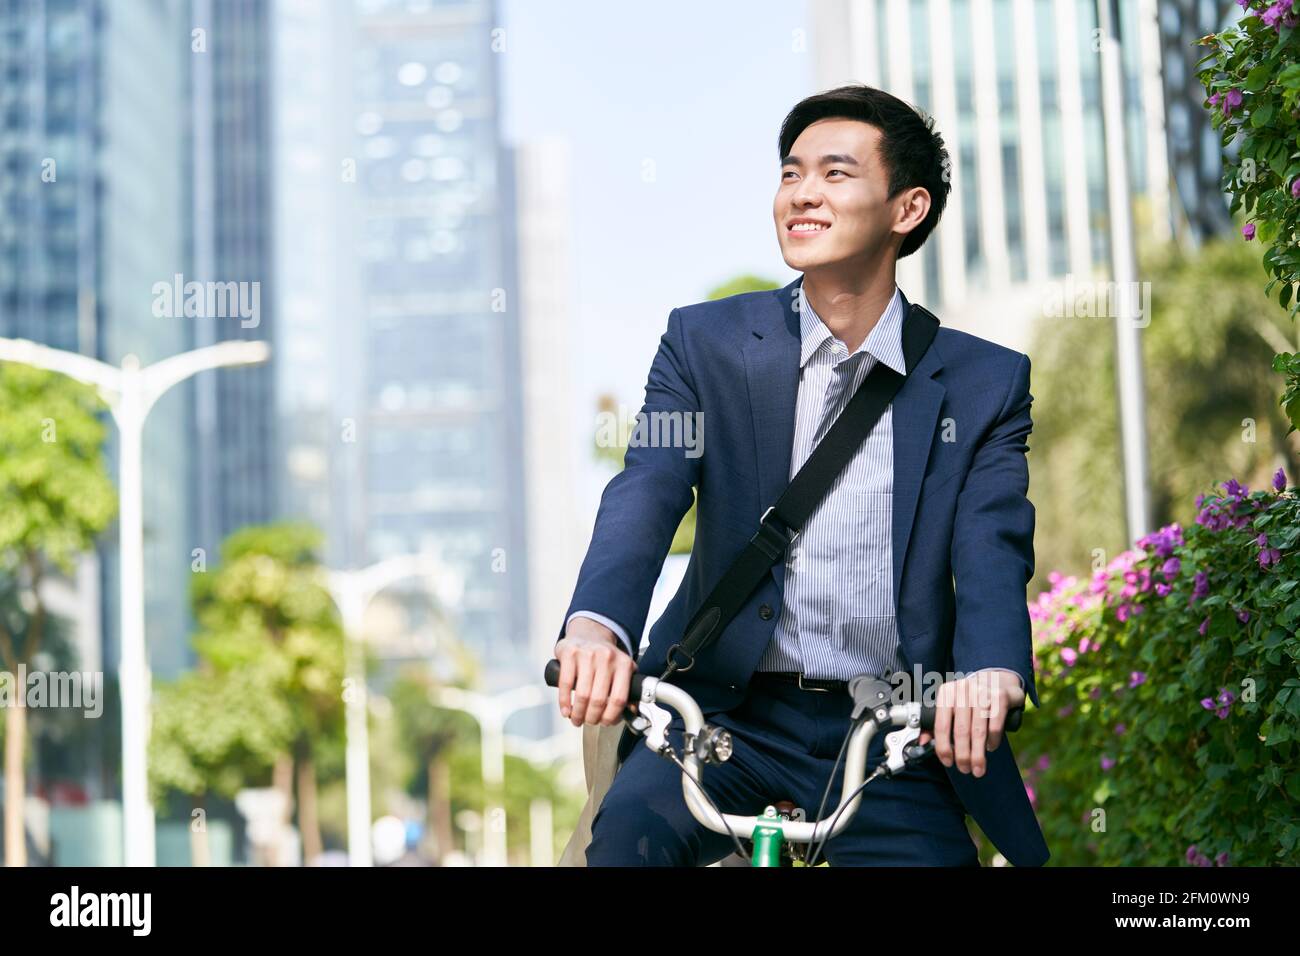 young asian business man riding bicycle in downtown financial district of modern city, happy and smiling Stock Photo